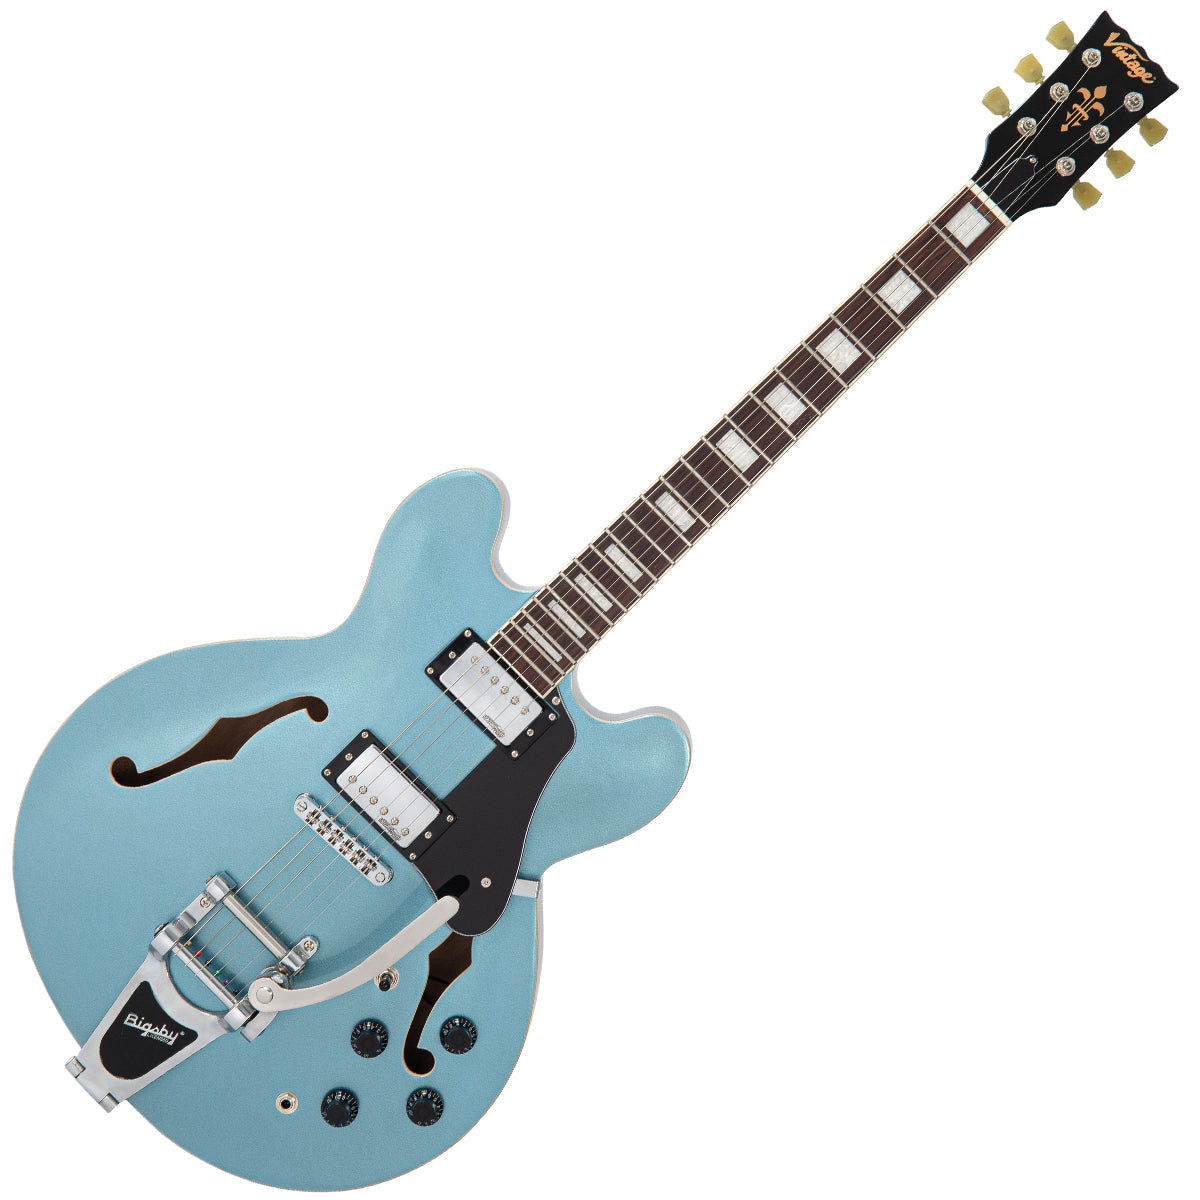 Vintage VSA500B ReIssued Semi Acoustic Guitar w/Bigsby ~ Gun Hill Blue, Electric Guitar for sale at Richards Guitars.